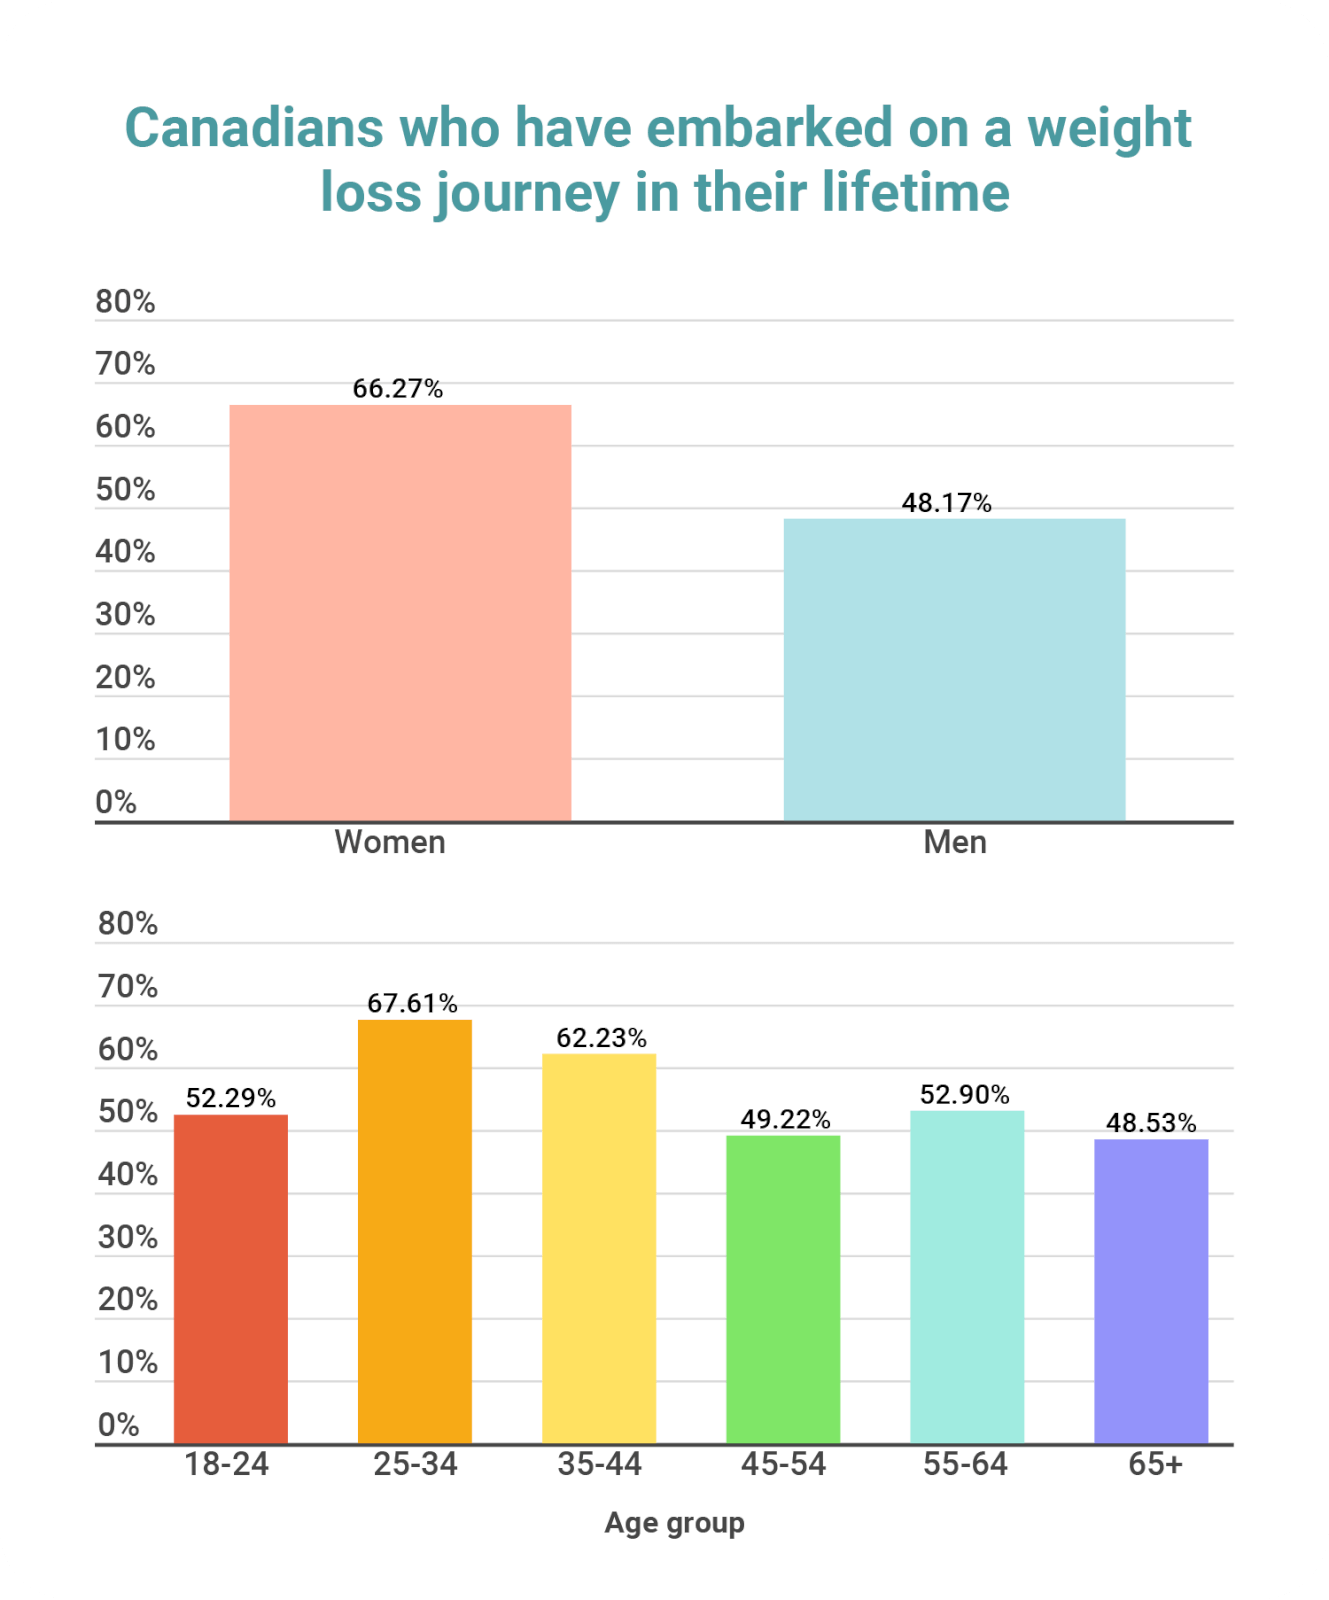 A bar chart showing the intention to lose weight from Canadian survey respondents